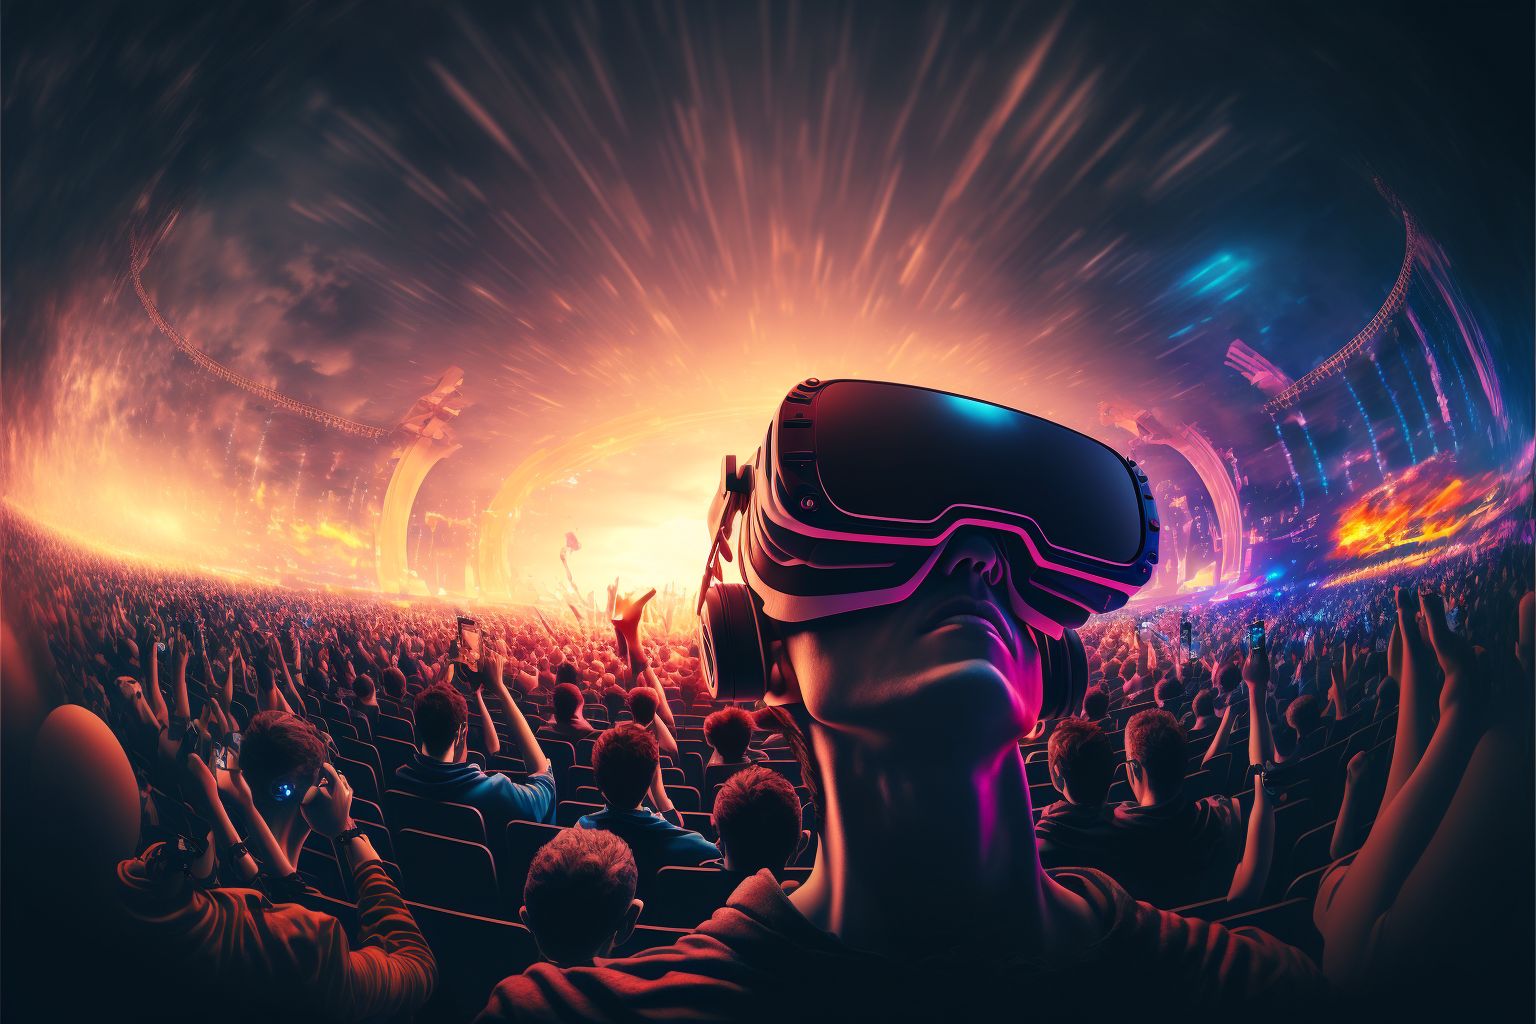 Nobody wants gawkers at a VR concert